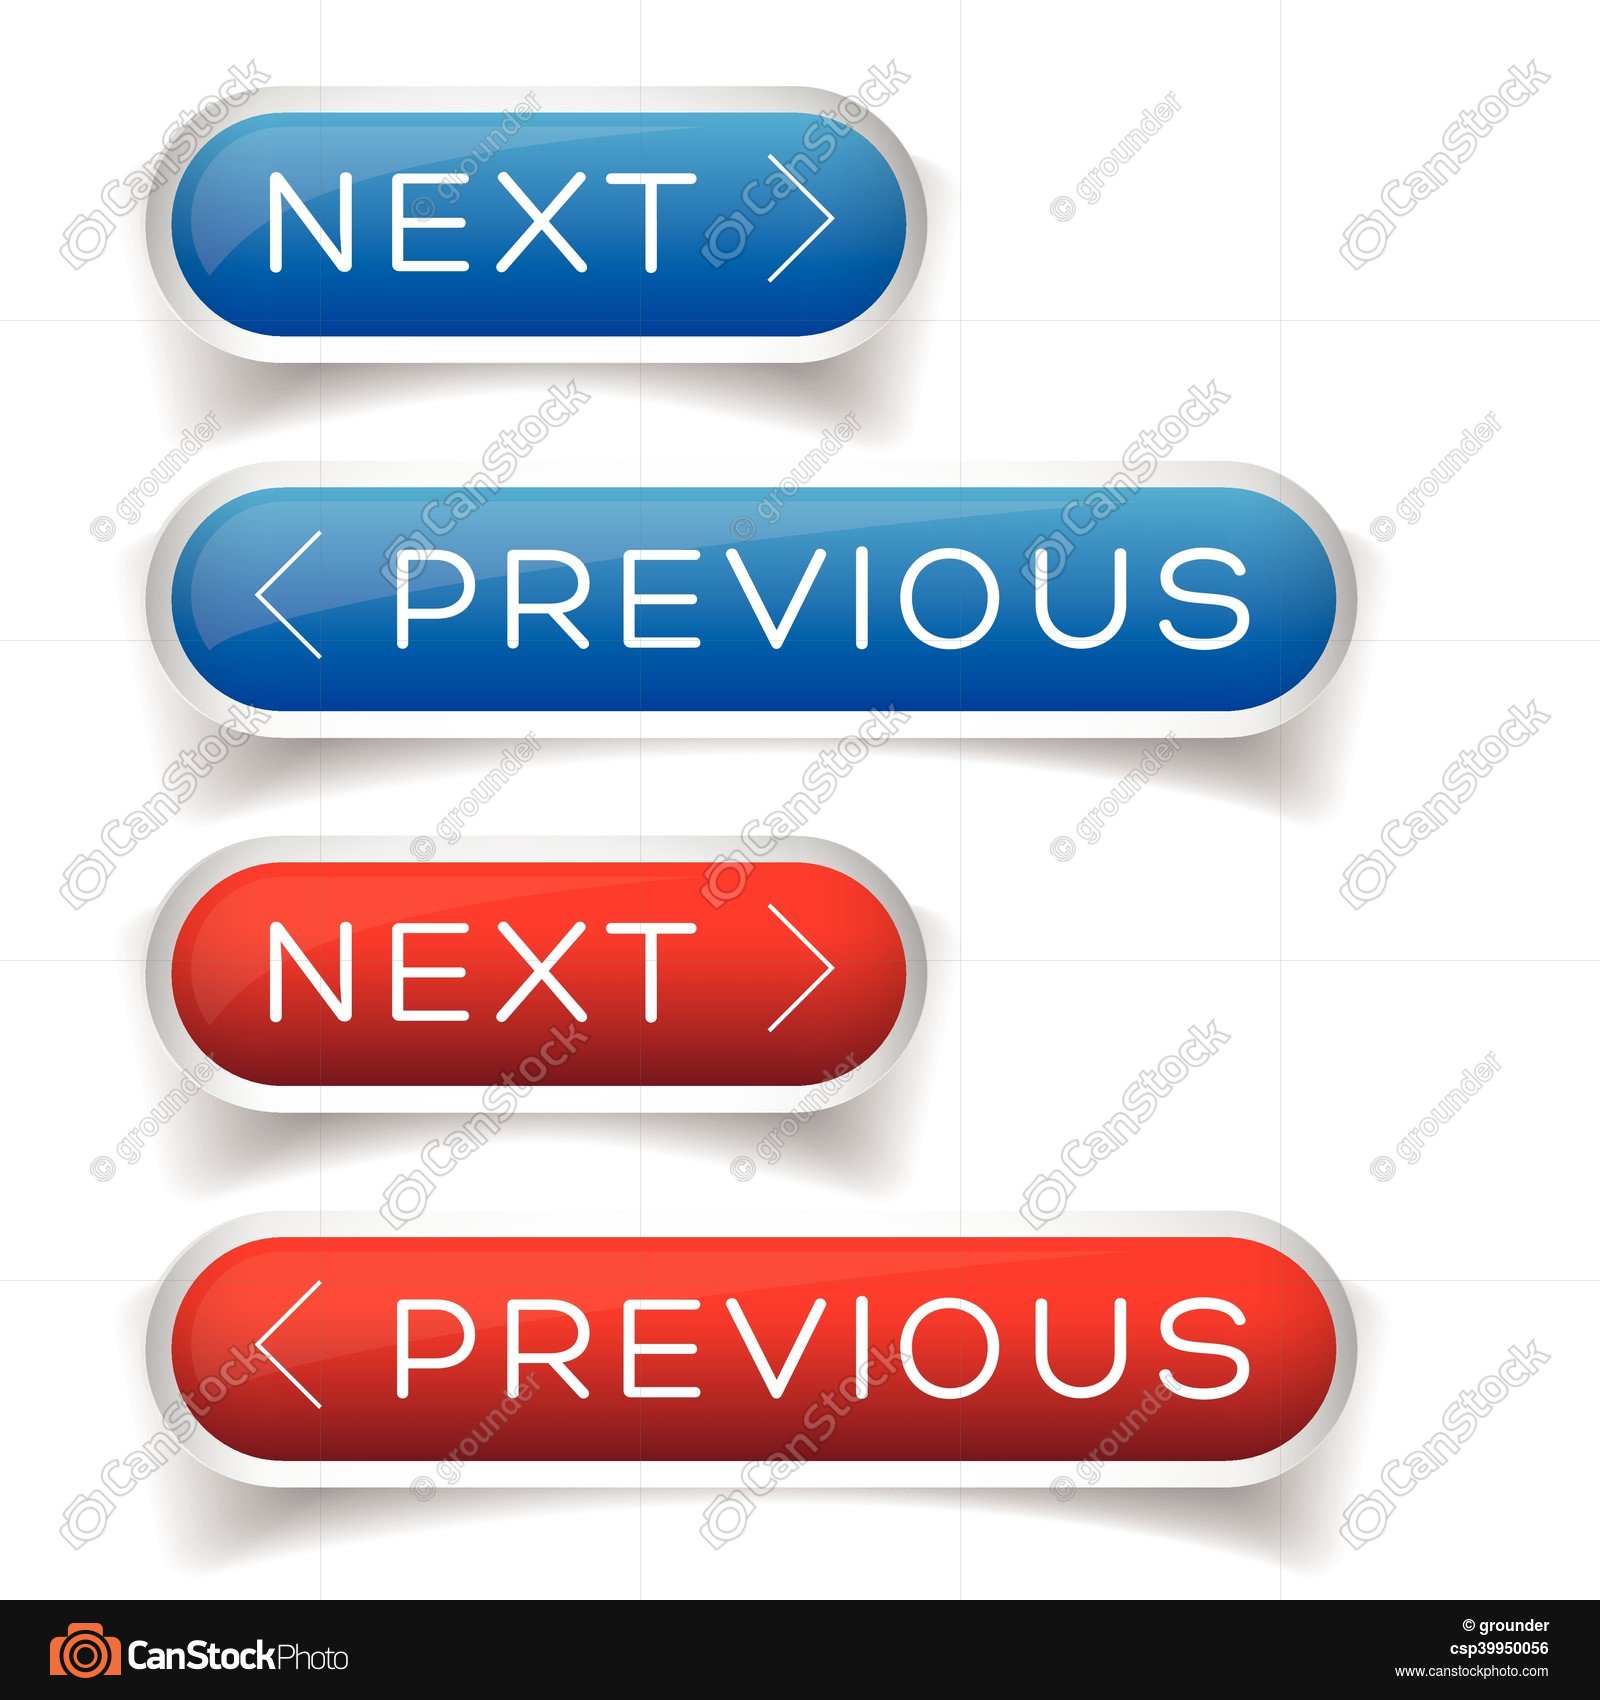 Next Previous button red and blue - csp39950056